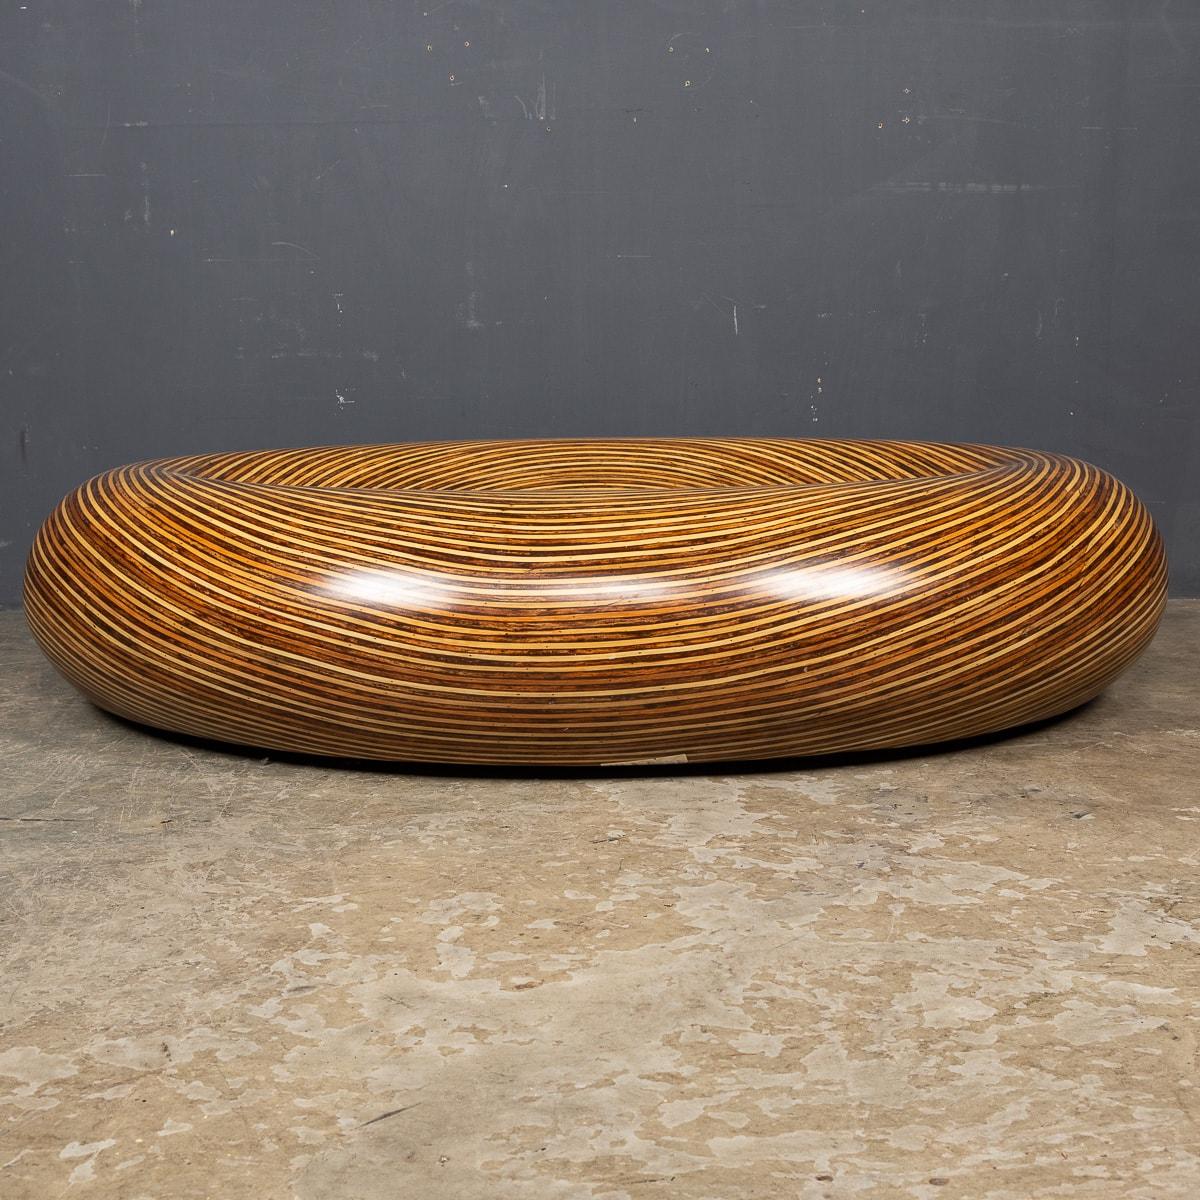 Italian 20th Century Large Moulded Fibreglass Table With Layered Wood Effect c.1970 For Sale